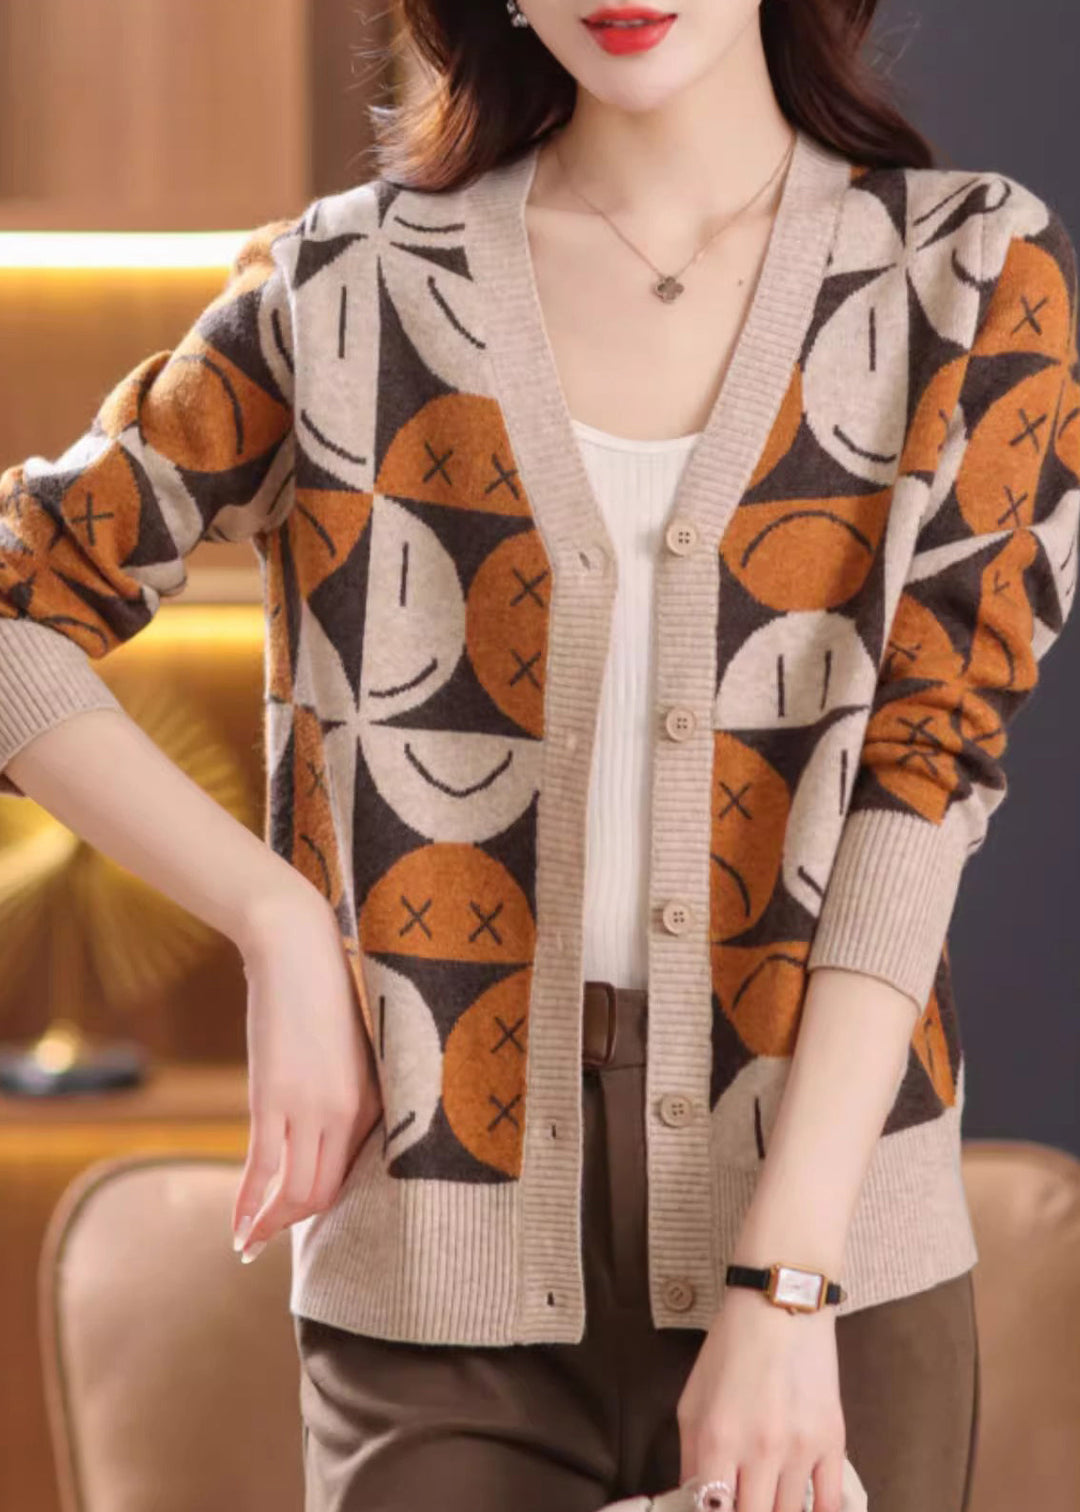 French Beige V Neck Button Patchwork Knit Cardigans Fall